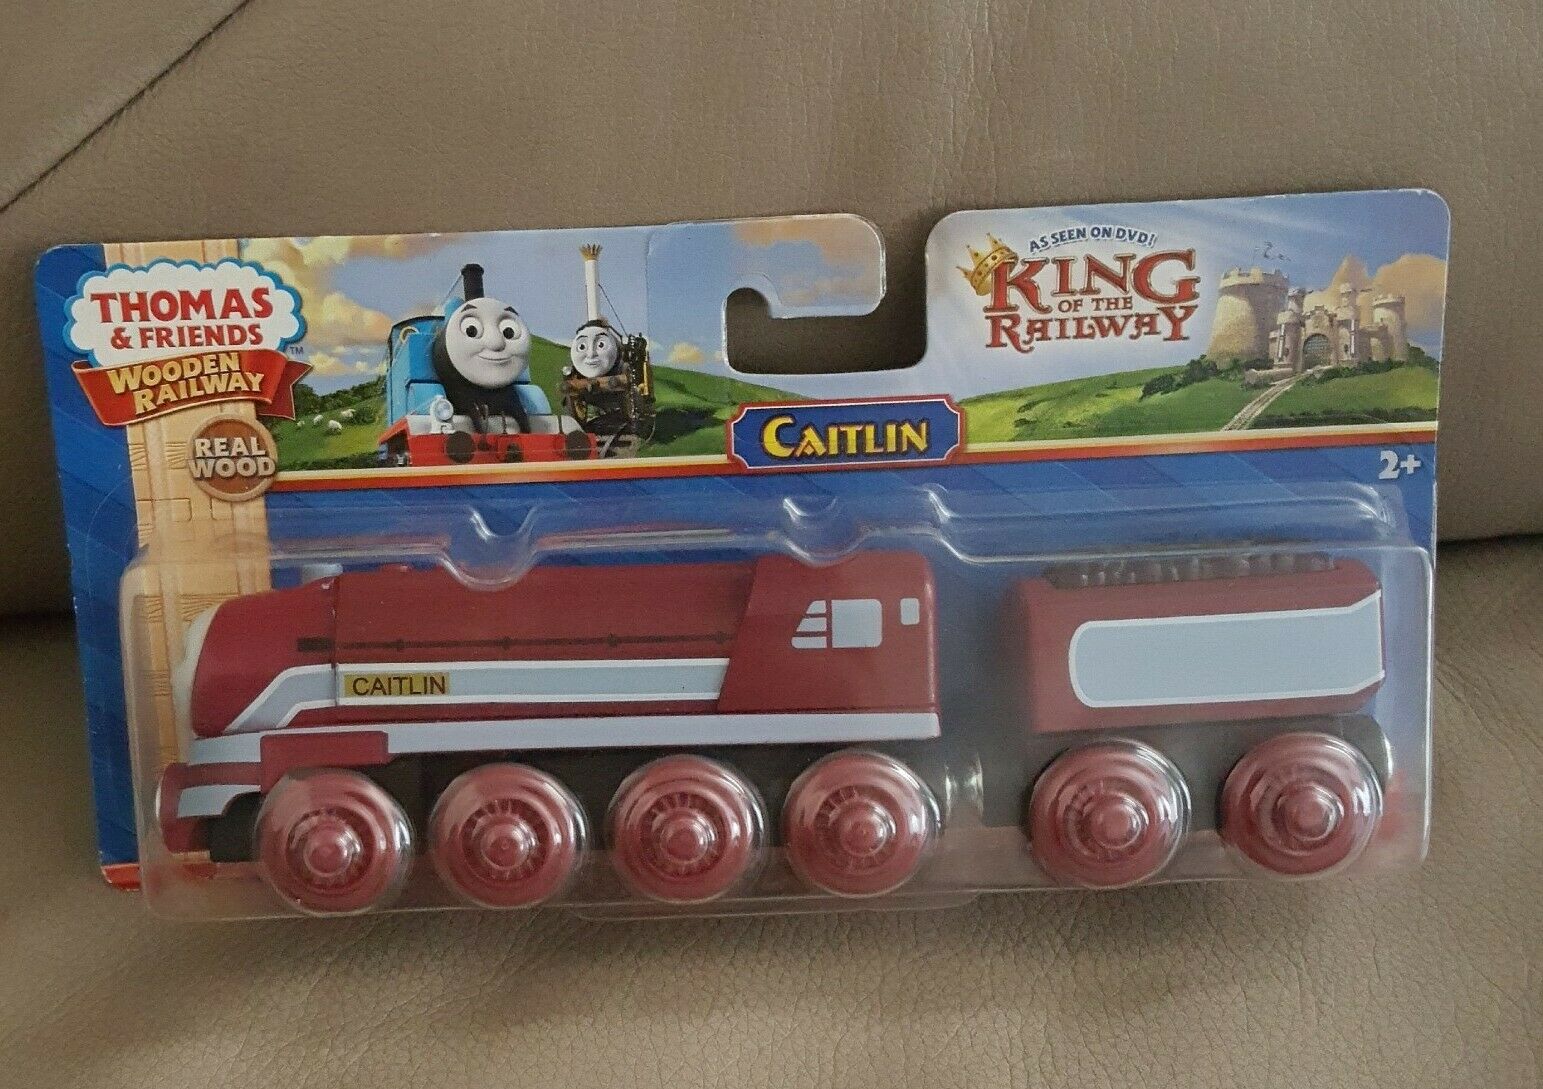 Caitlin Thomas & Friends Wooden Railway Double Caboose Train New Y5856